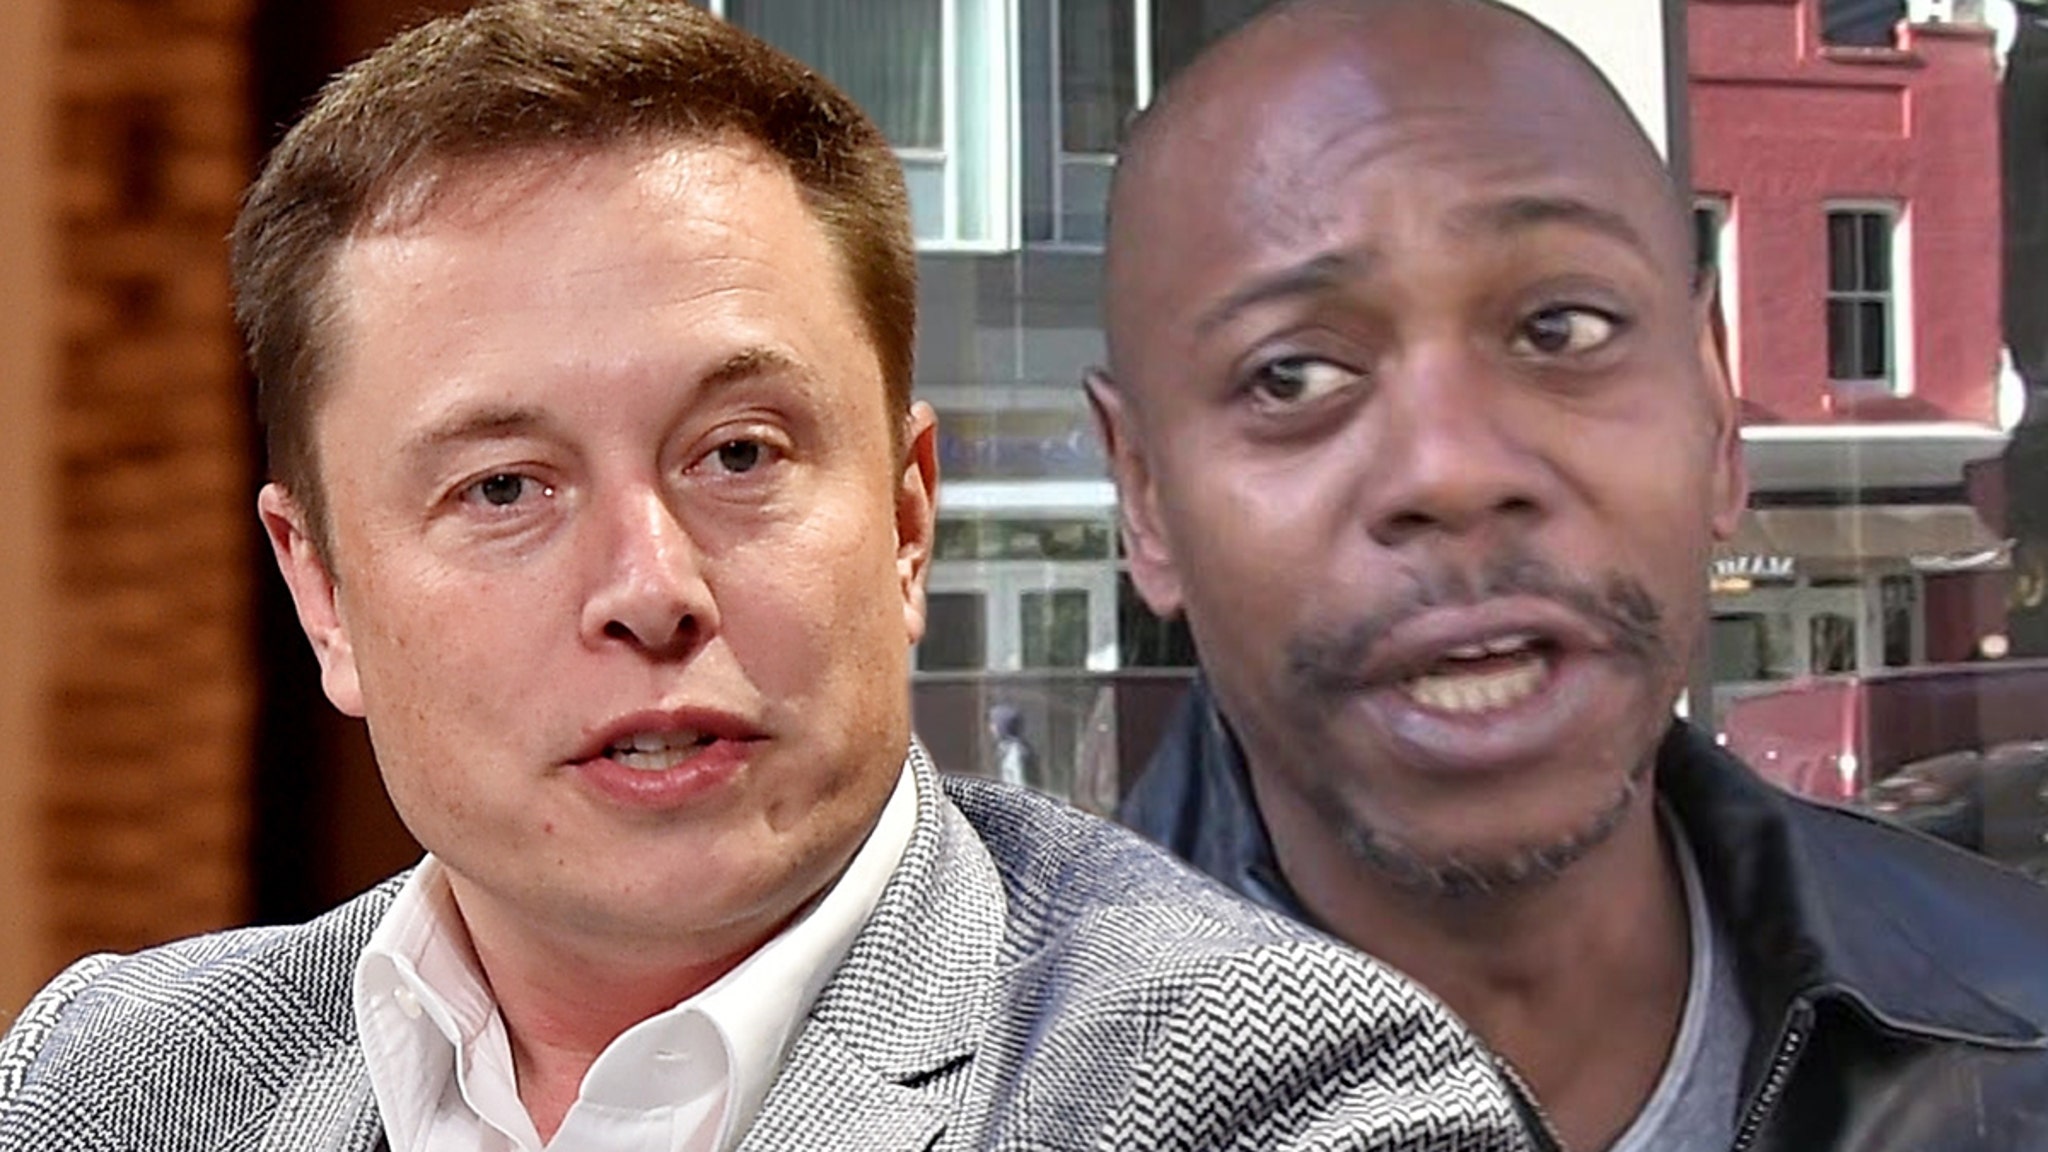 Elon Musk Booed During Dave Chappelle’s S.F. Comedy Show